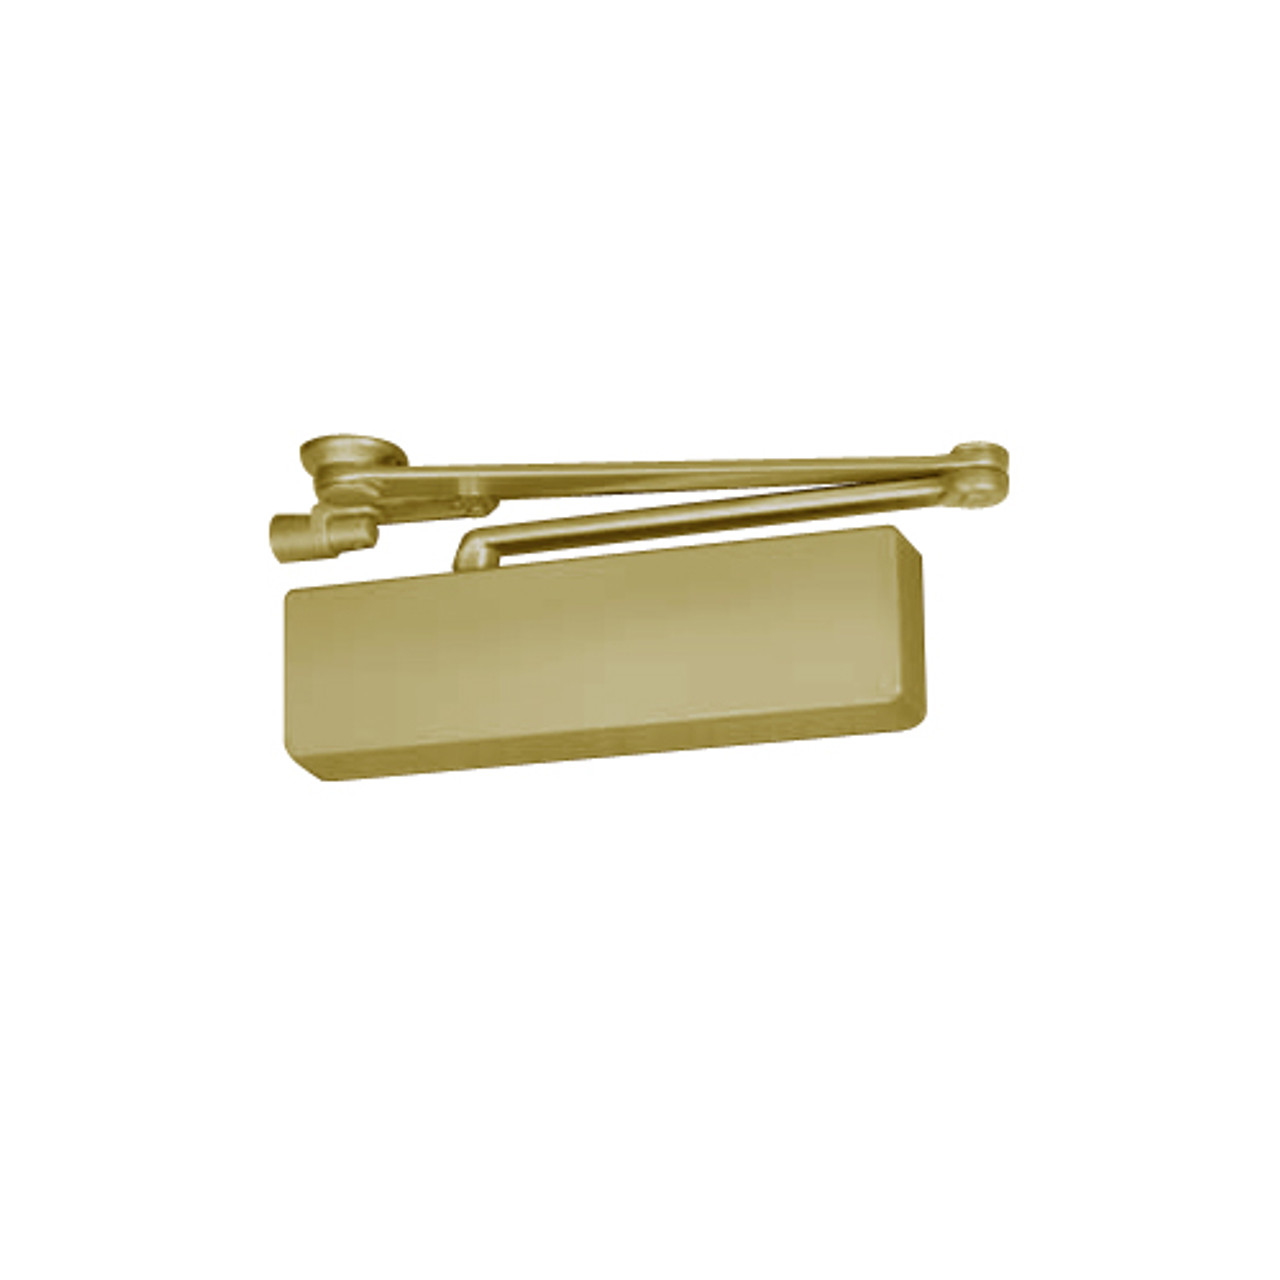 CPS7500DA-696 Norton 7500 Series Non-Hold Open Institutional Door Closer with CloserPlus Spring Arm in Gold Finish